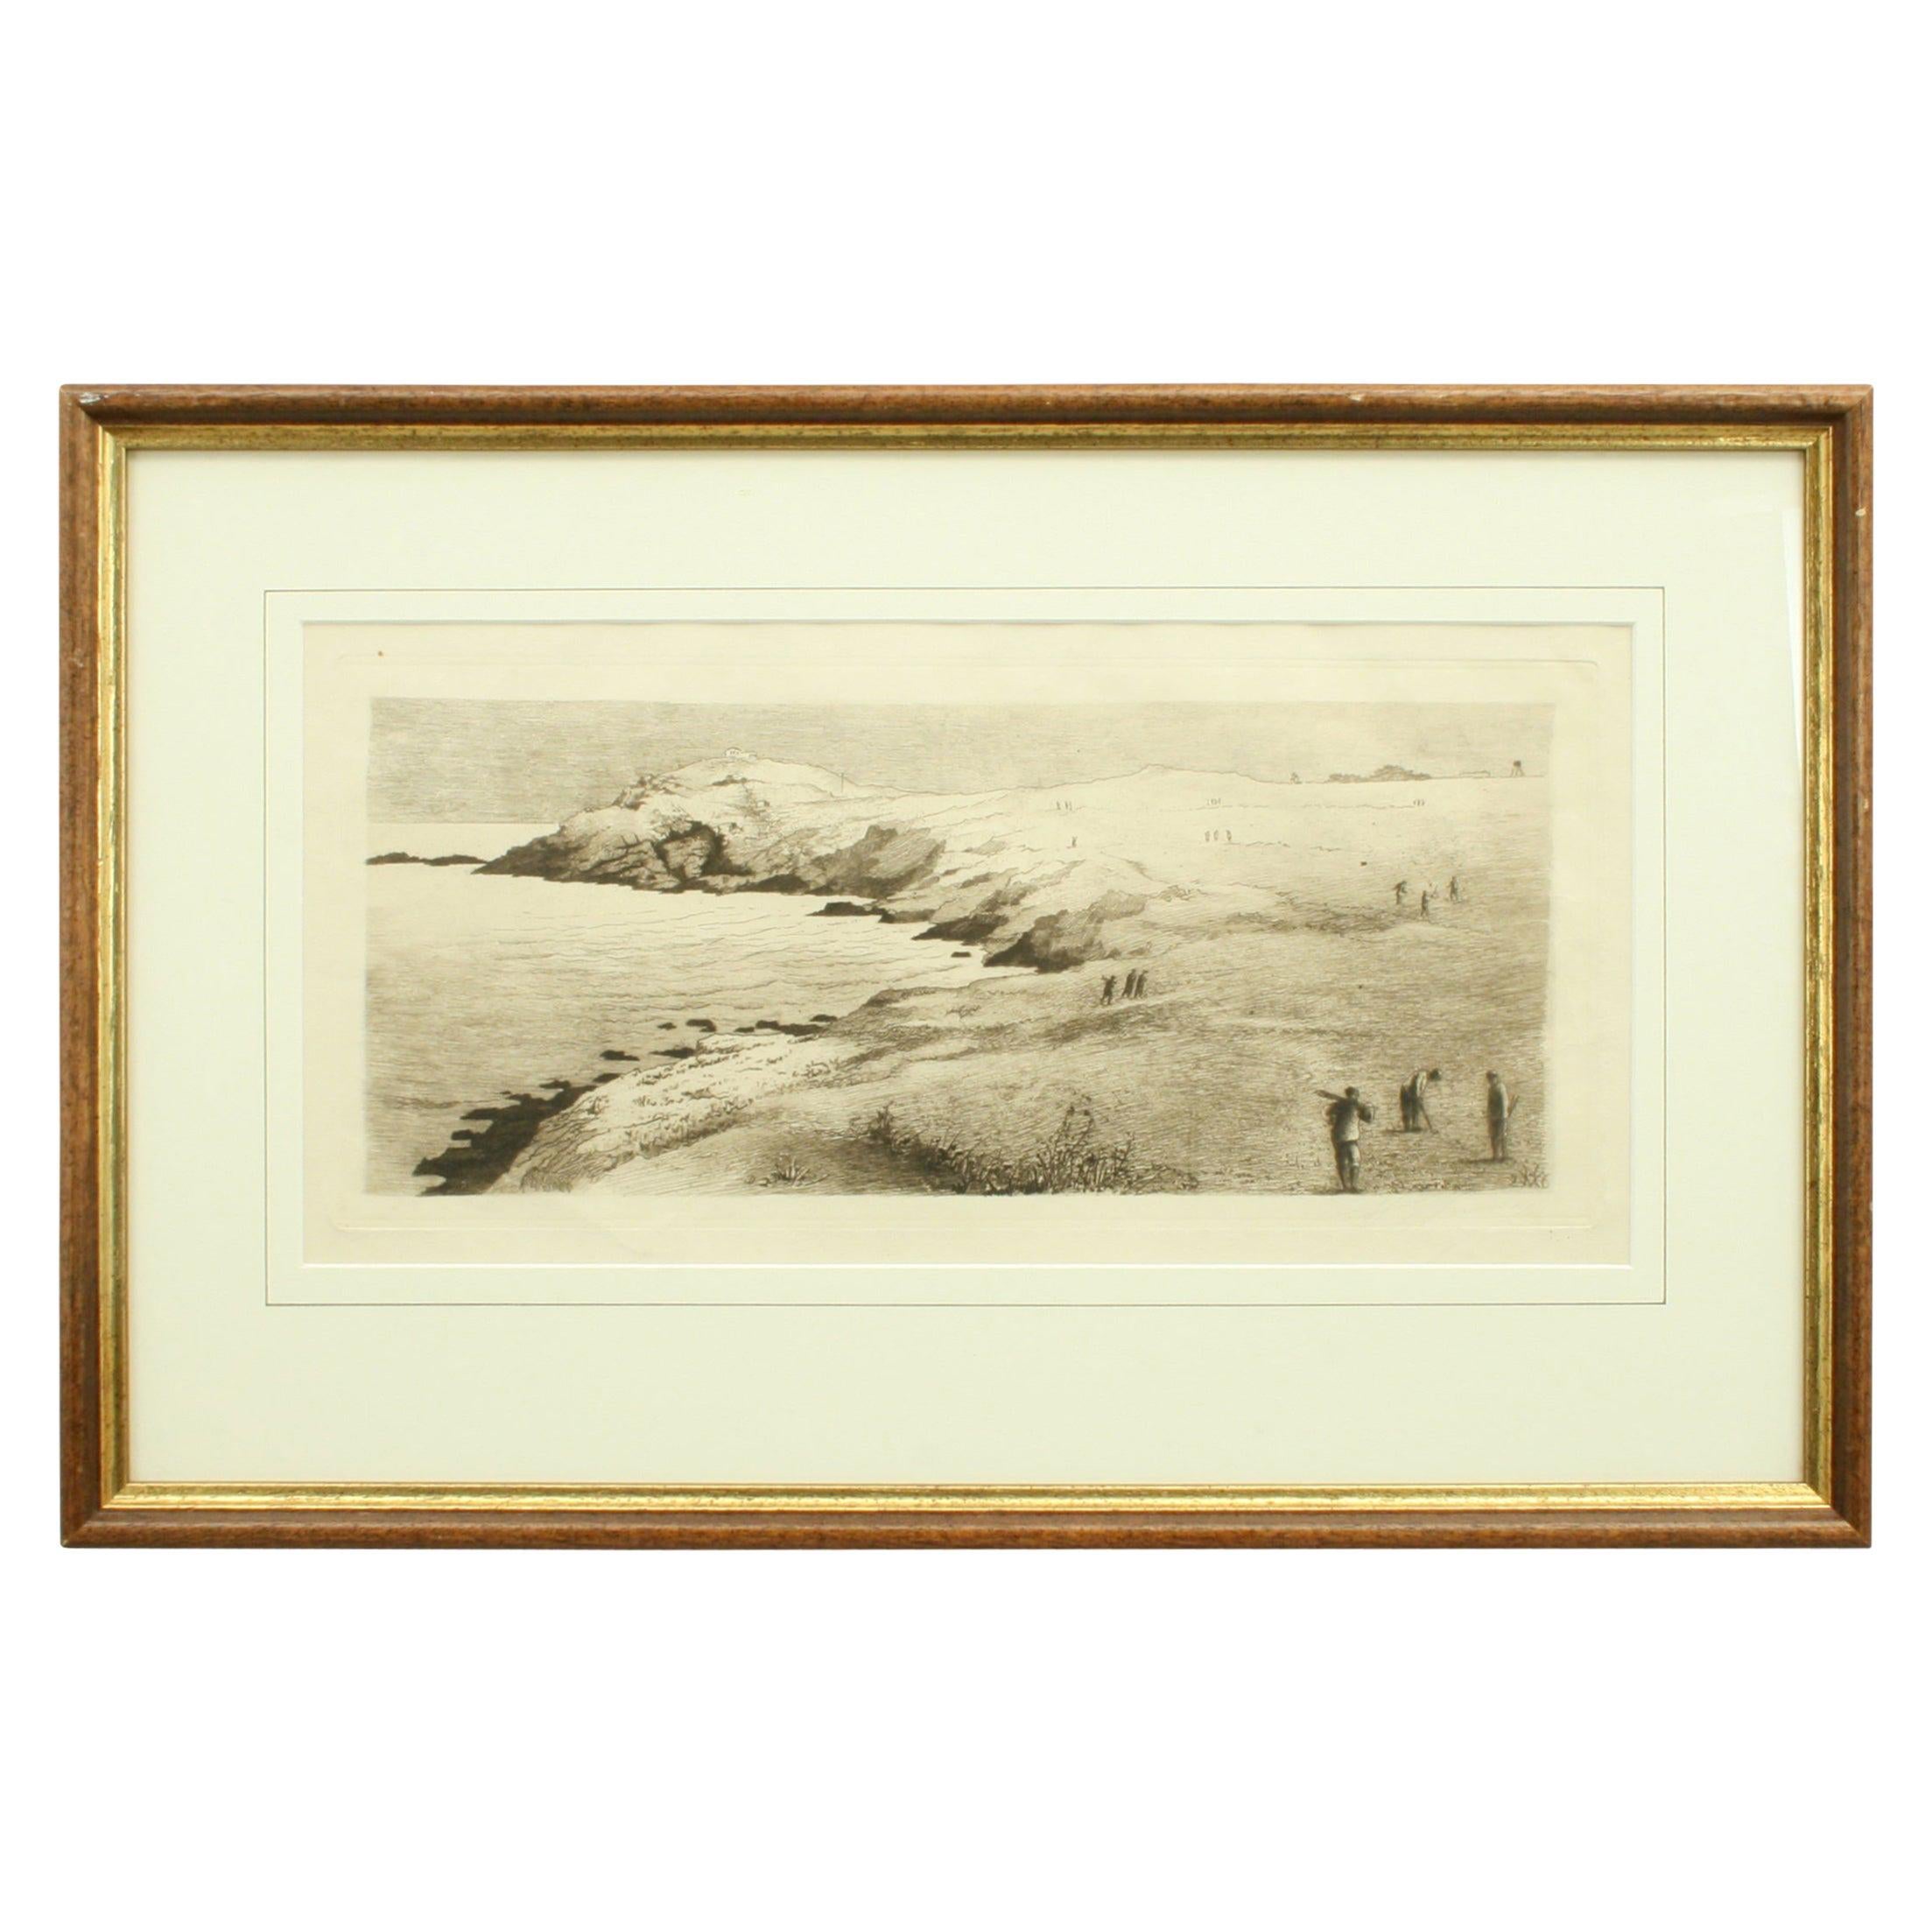 Antique Etching, Scottish Golf Course, Cliff-Top Golf Course